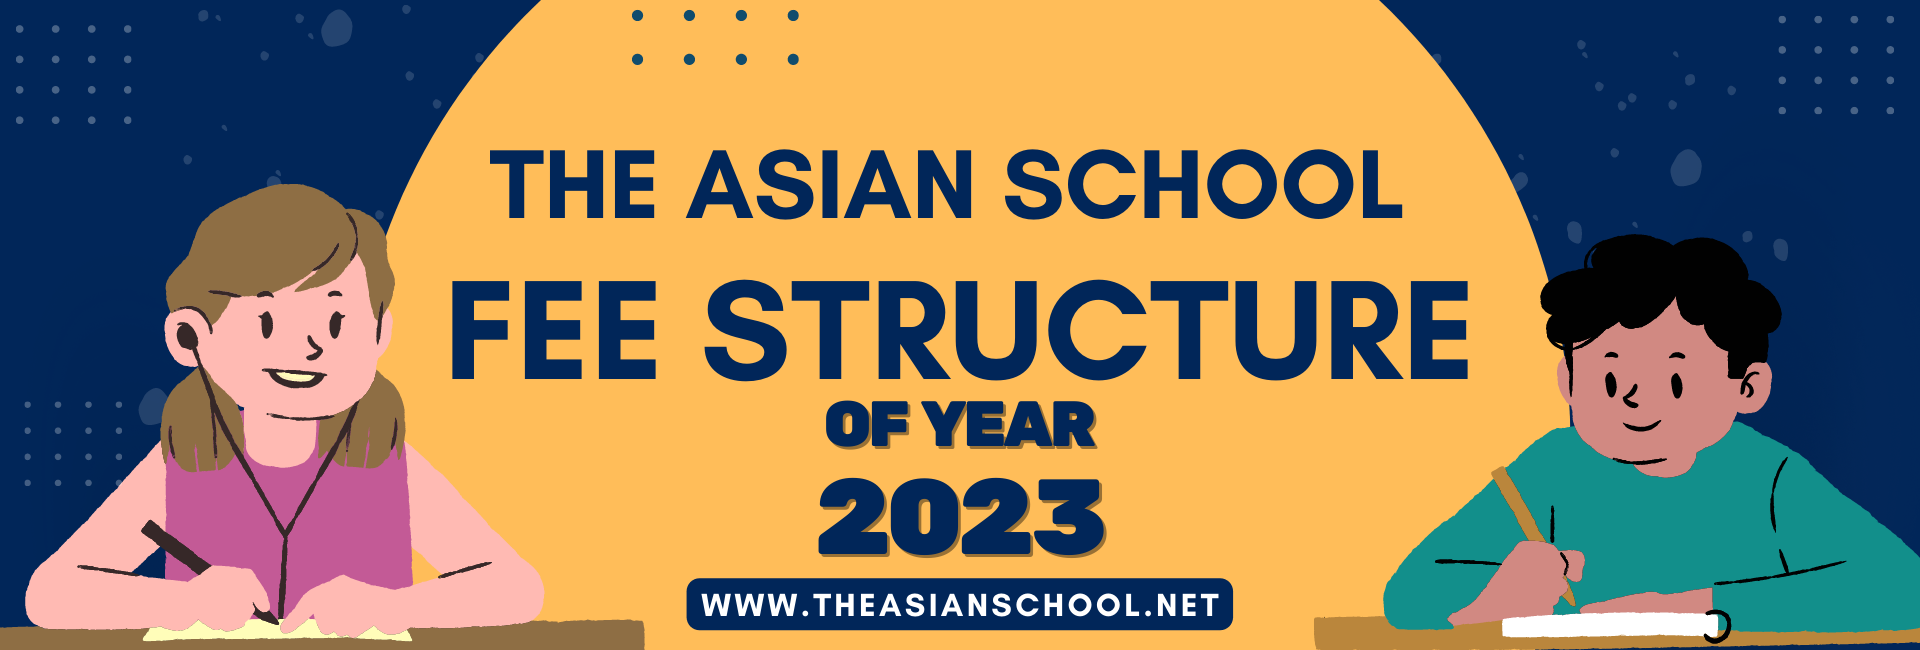 The Asian School Fee Structure